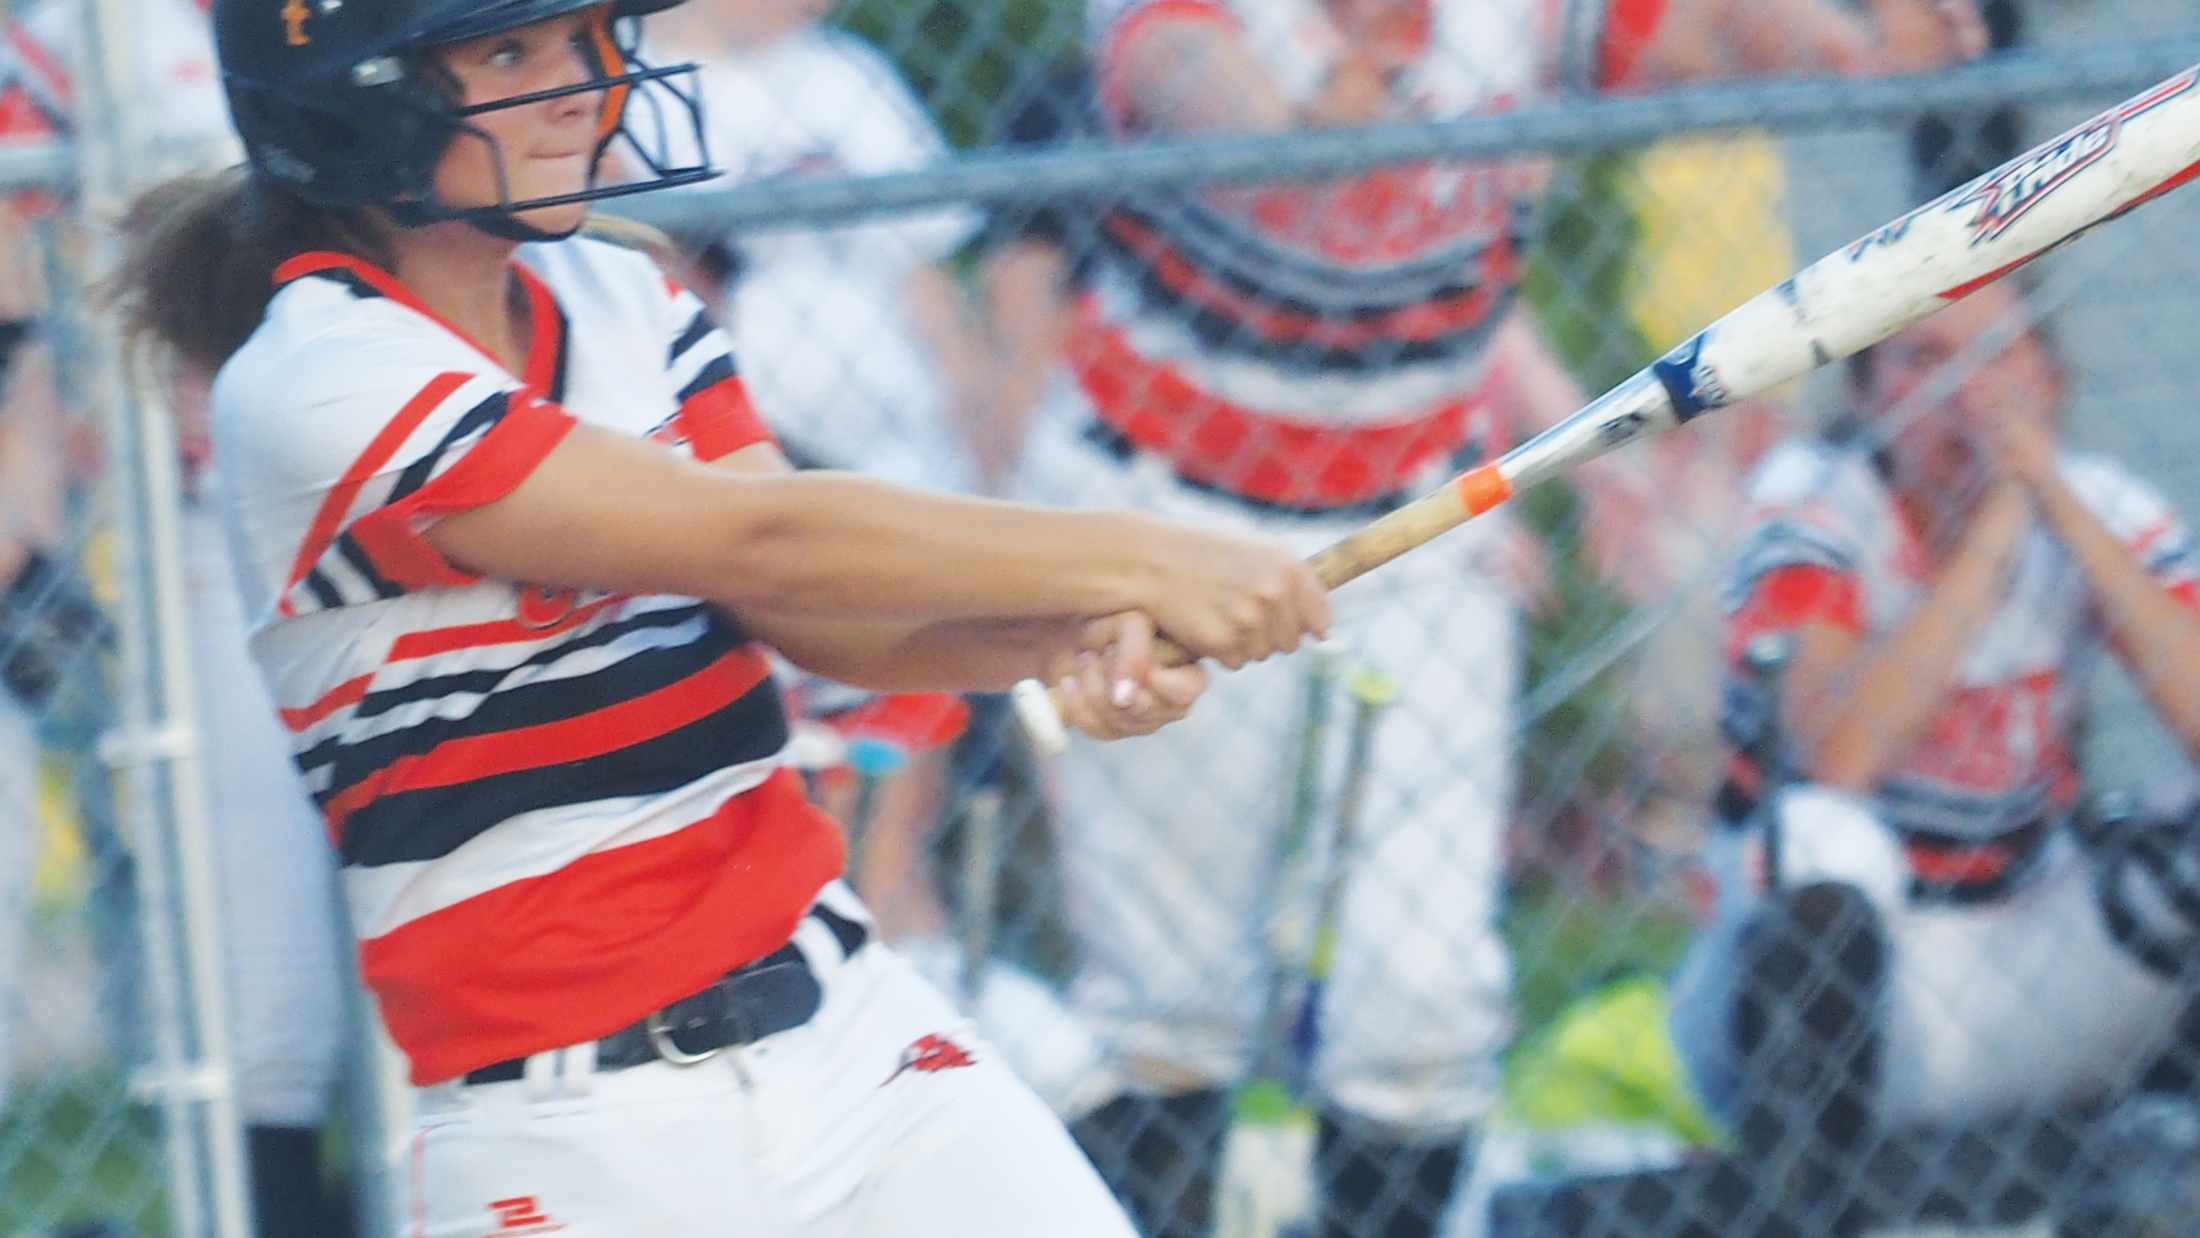 Comets sweep Chickasaws, clinch NEIC softball title